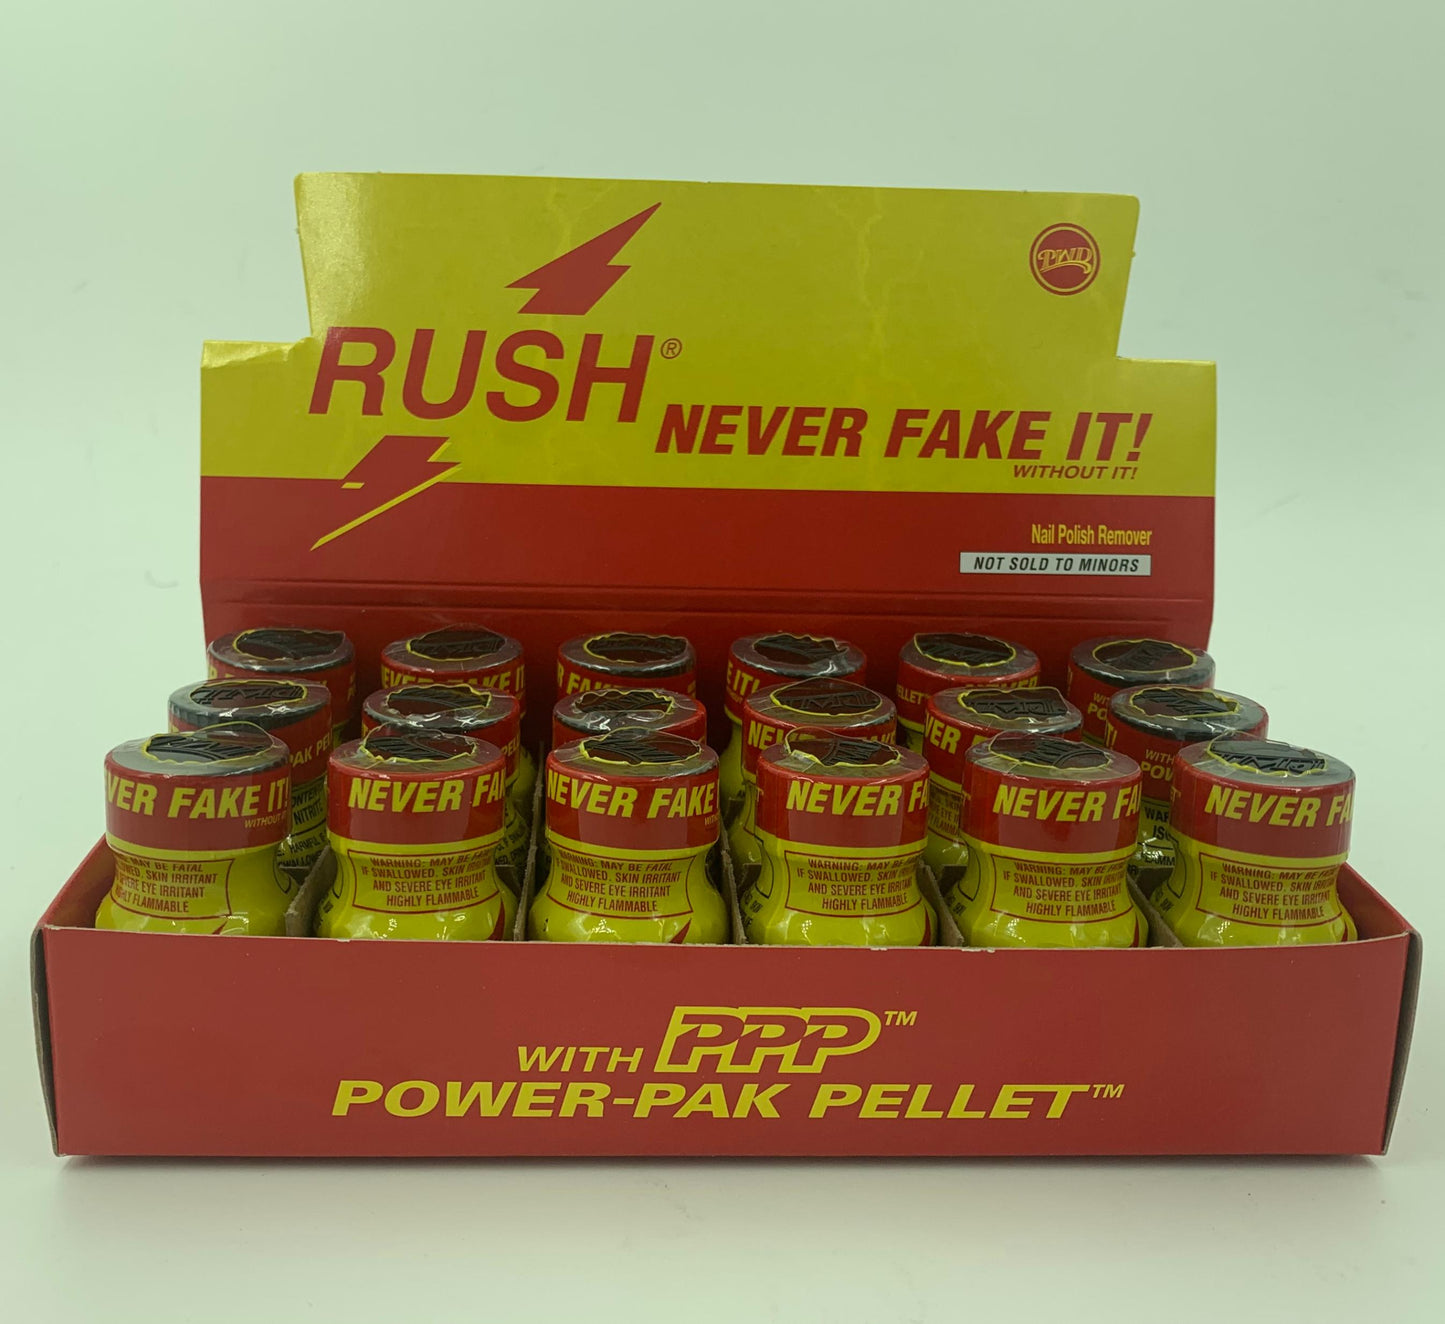 Rush Electrical Contact Cleaner 10 ml - 18 Count Display